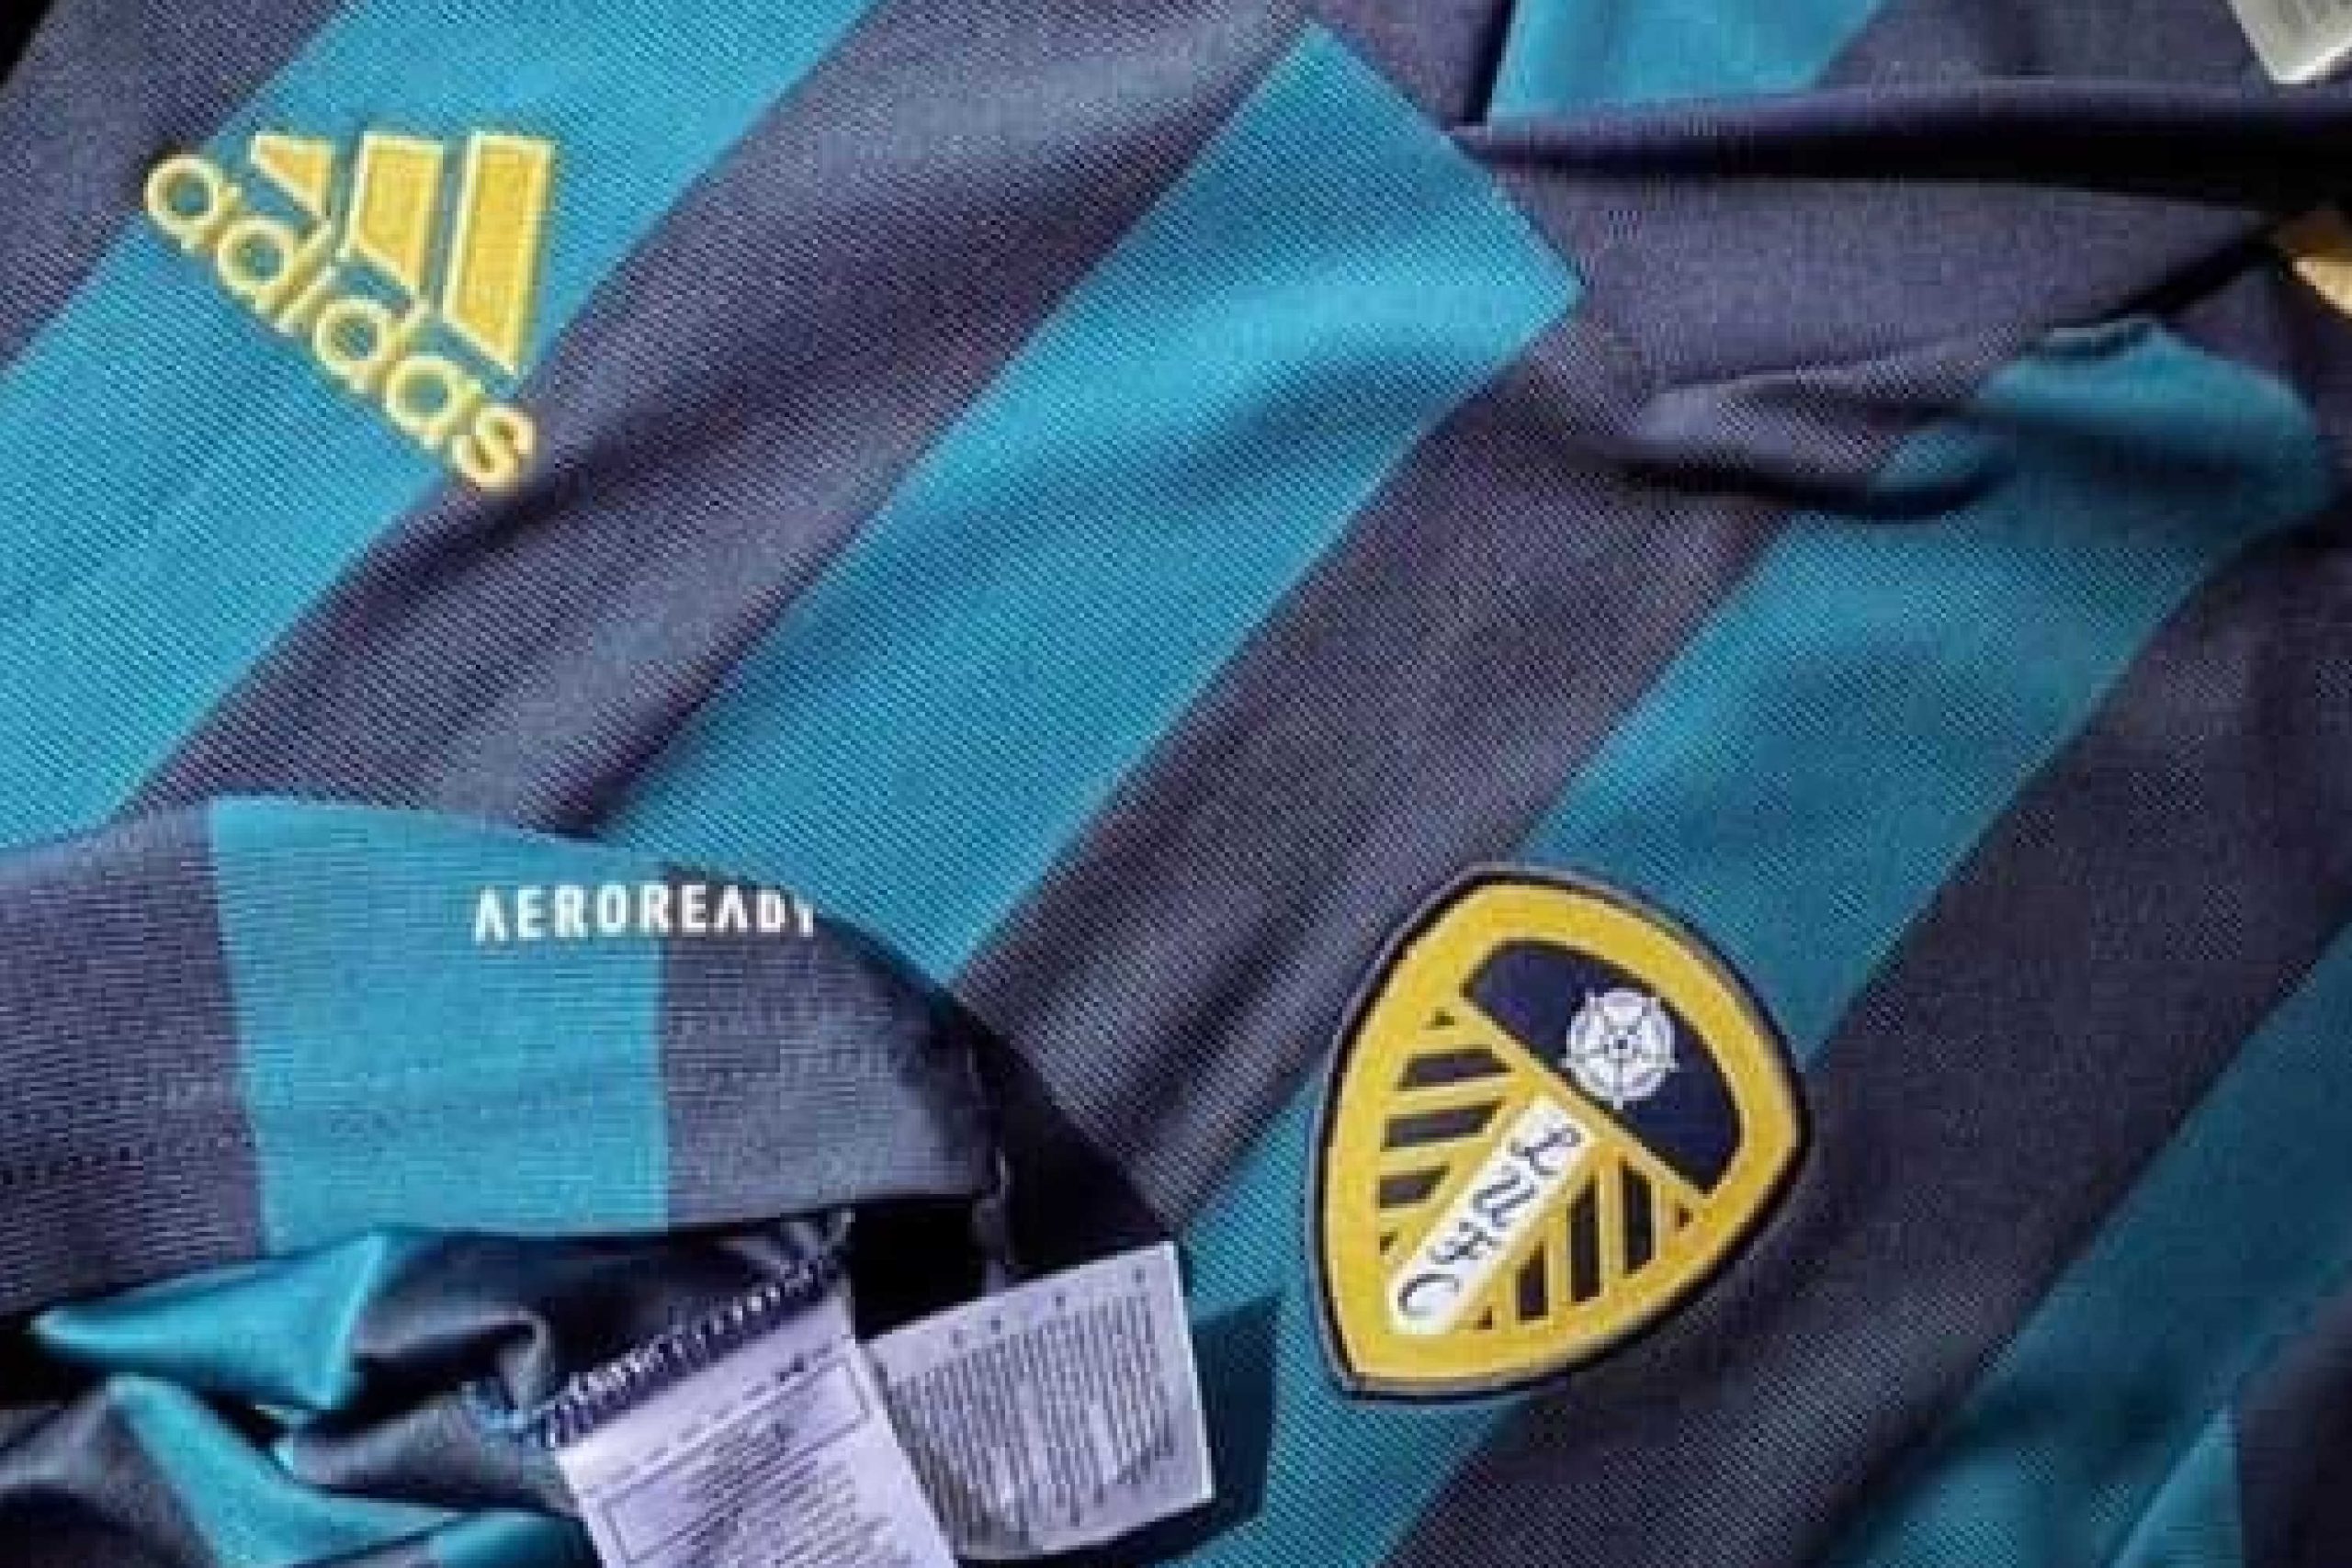 First real leak of Leeds United’s away kit for 20/21 season from Adidas surfaces online